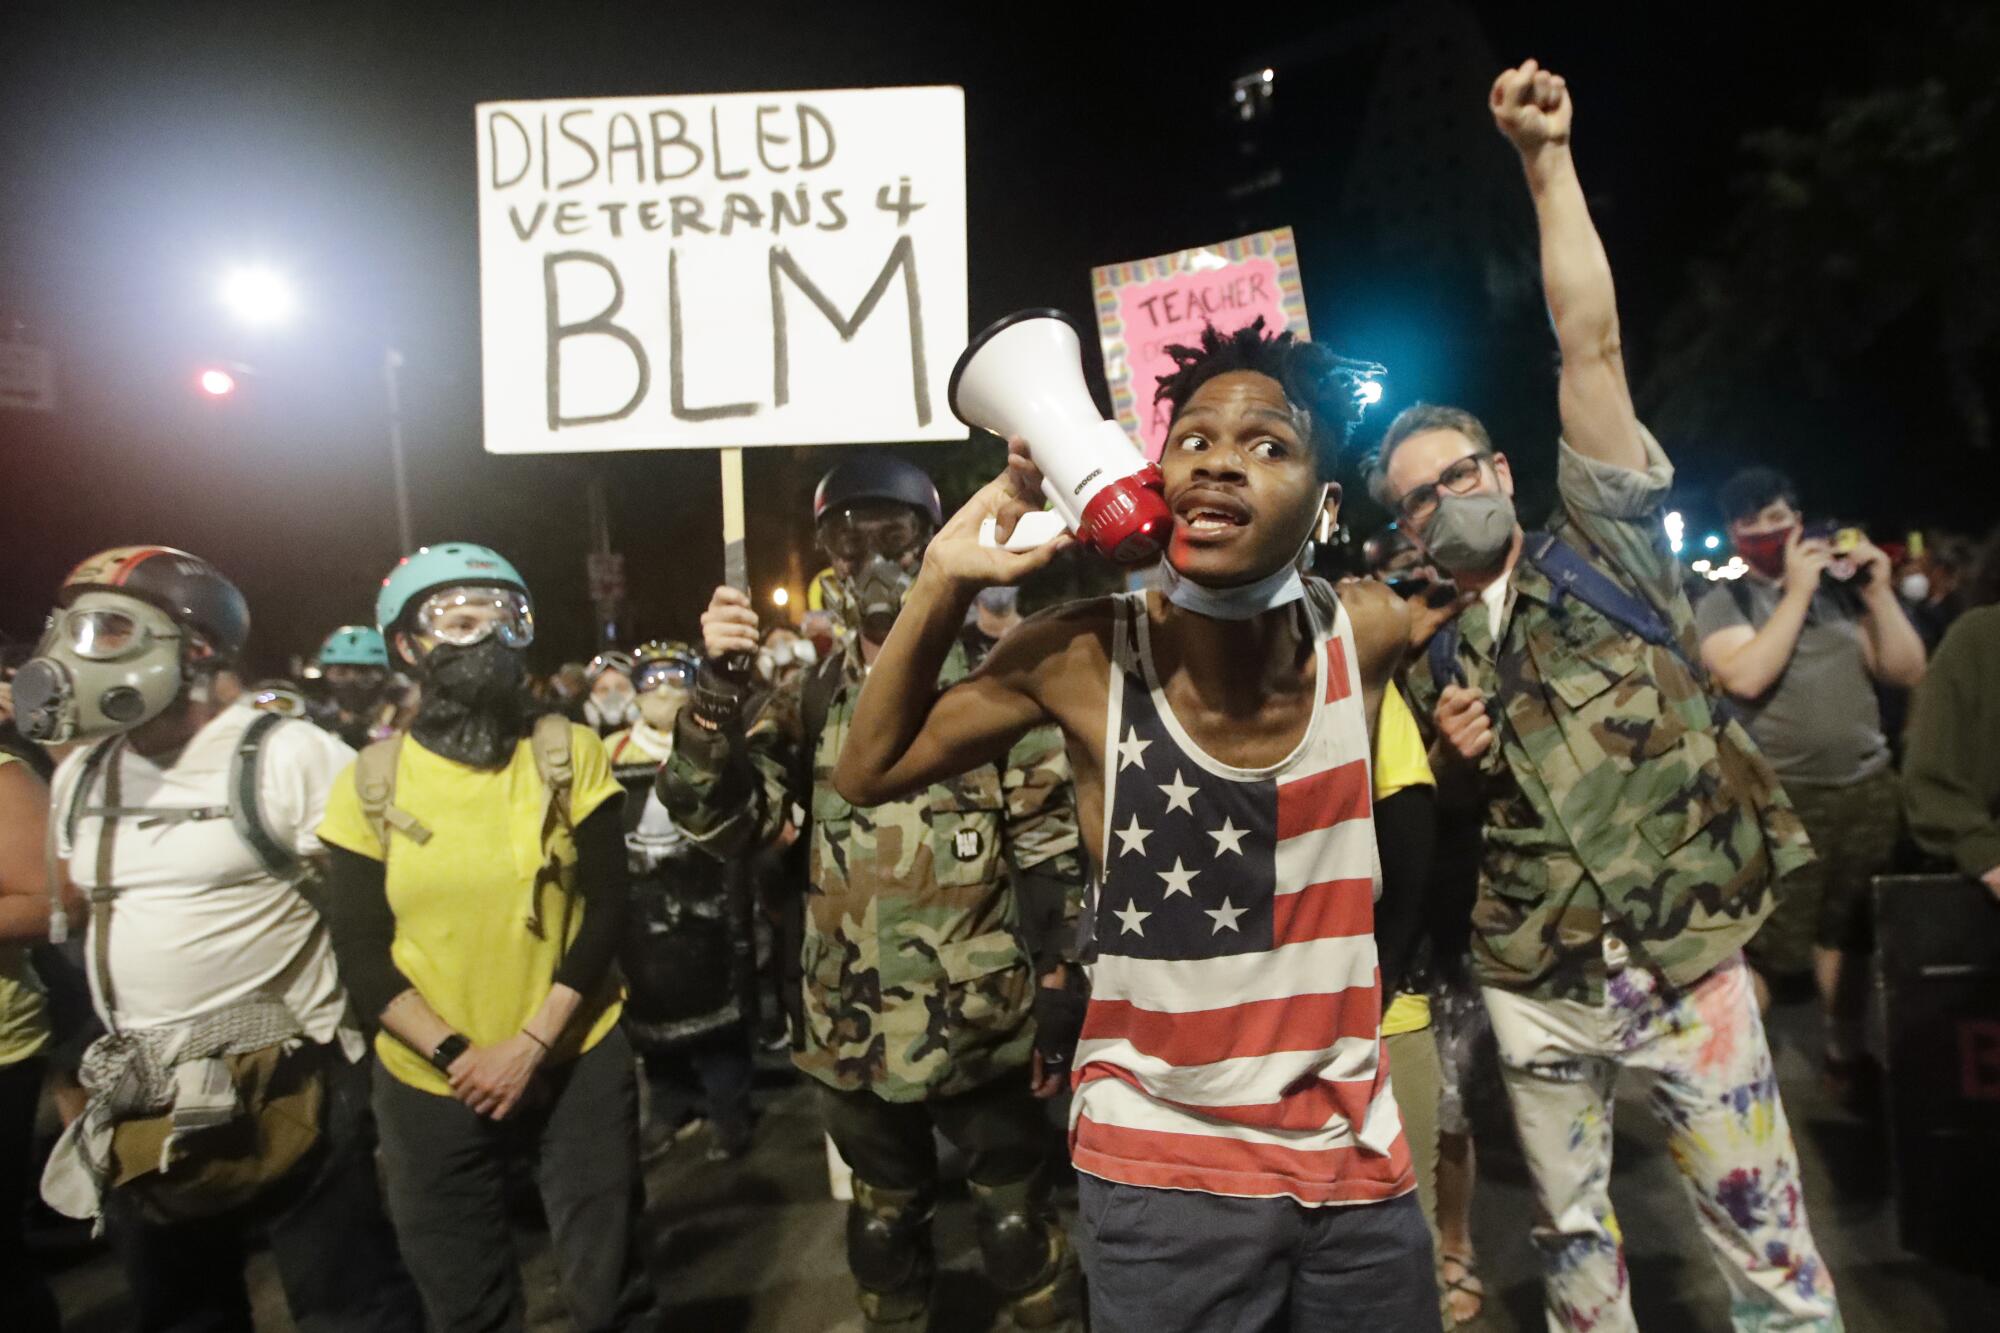 A demonstrator shouts slogans using a bullhorn next to a group of military veterans during a Black Lives Matter protest.